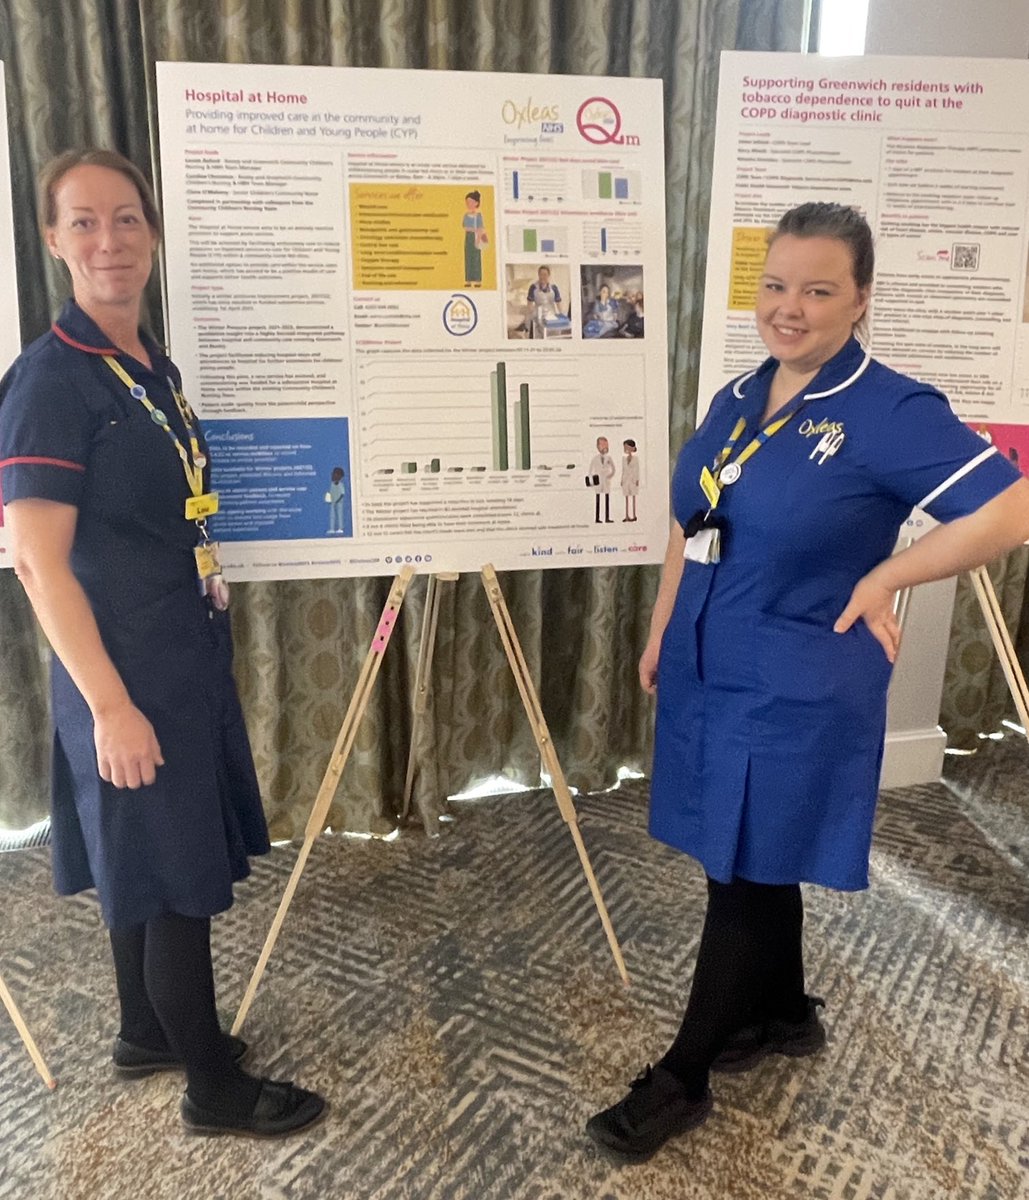 Our wonderful ⁦@oxchildnurses⁩, Ashley and ⁦@AxfordLou⁩, presenting Hospital at Home - children’s community nursing services #GreatOutOfHospitalCare #WeAreQuality ⁦@OxleasQM⁩ ⁦⁦@abimfadipe⁩ ⁦⁦@Vicky362174⁩ ⁦@TobiasHill84⁩ 👏👏